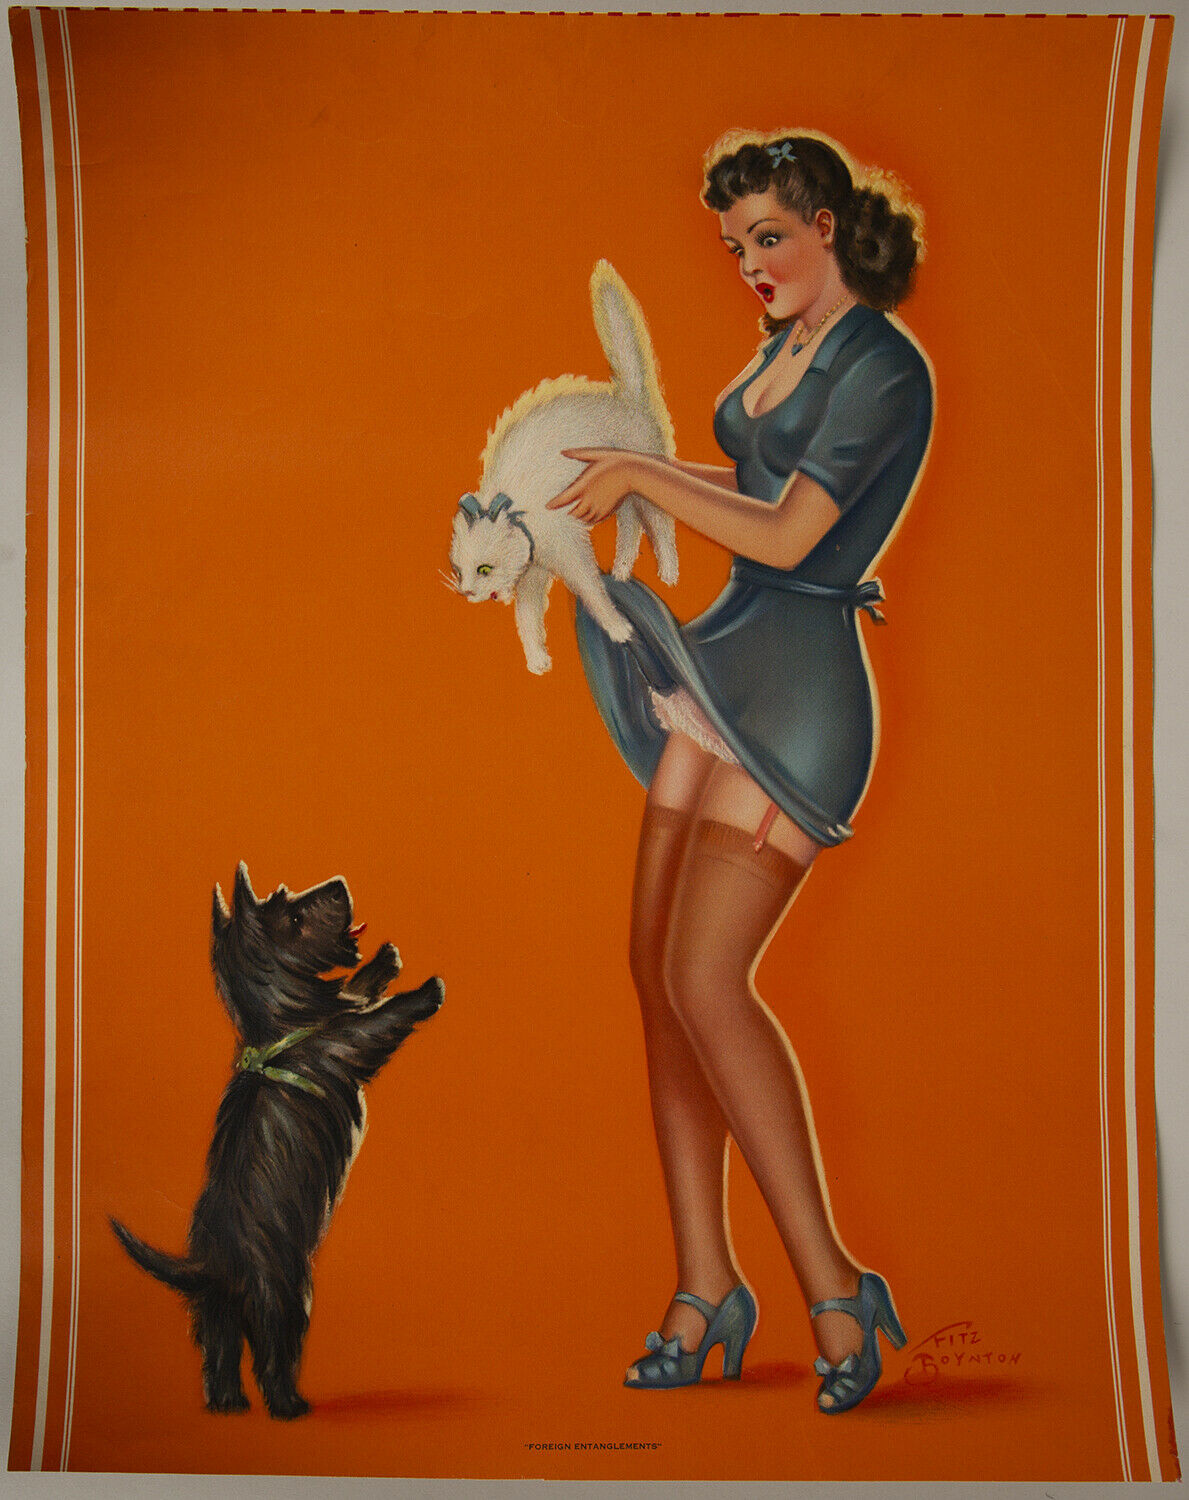 1940s Fitz Boynton Stocking Clad Pin Up Cheesecake Poster Foreign Entanglement